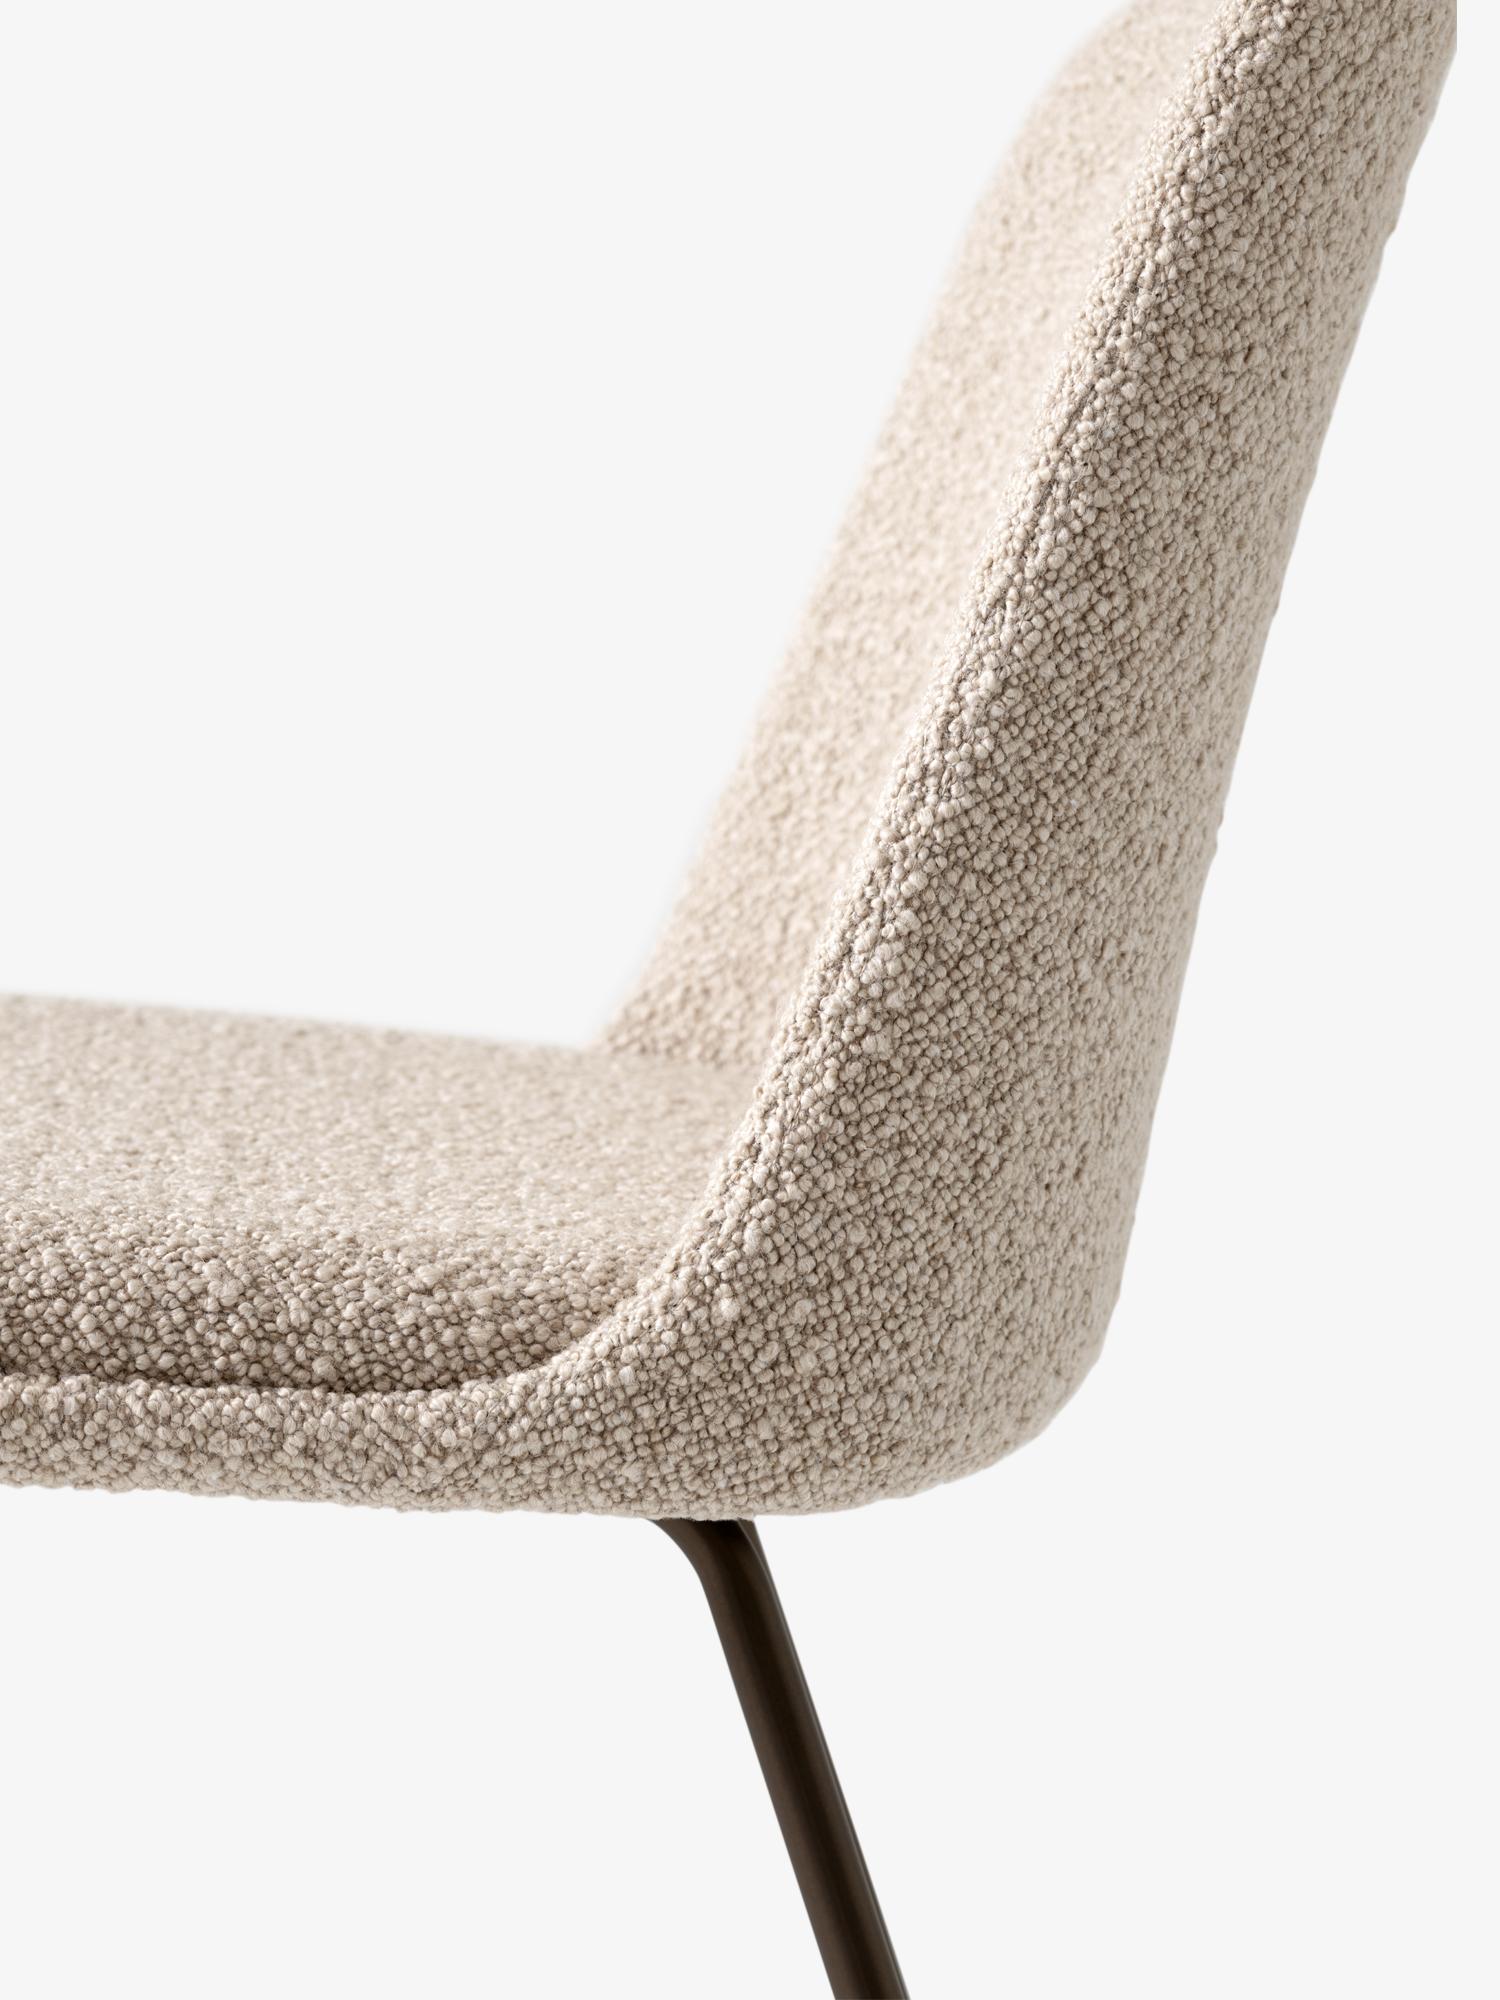 Boasting a shell crafted from recycled plastic, Rely is a chair with environmentally-friendly credentials. 
Designed by Hee Welling, its simple appearance and ergonomic design embodies his signature fusion of minimalism and practicality. 
-